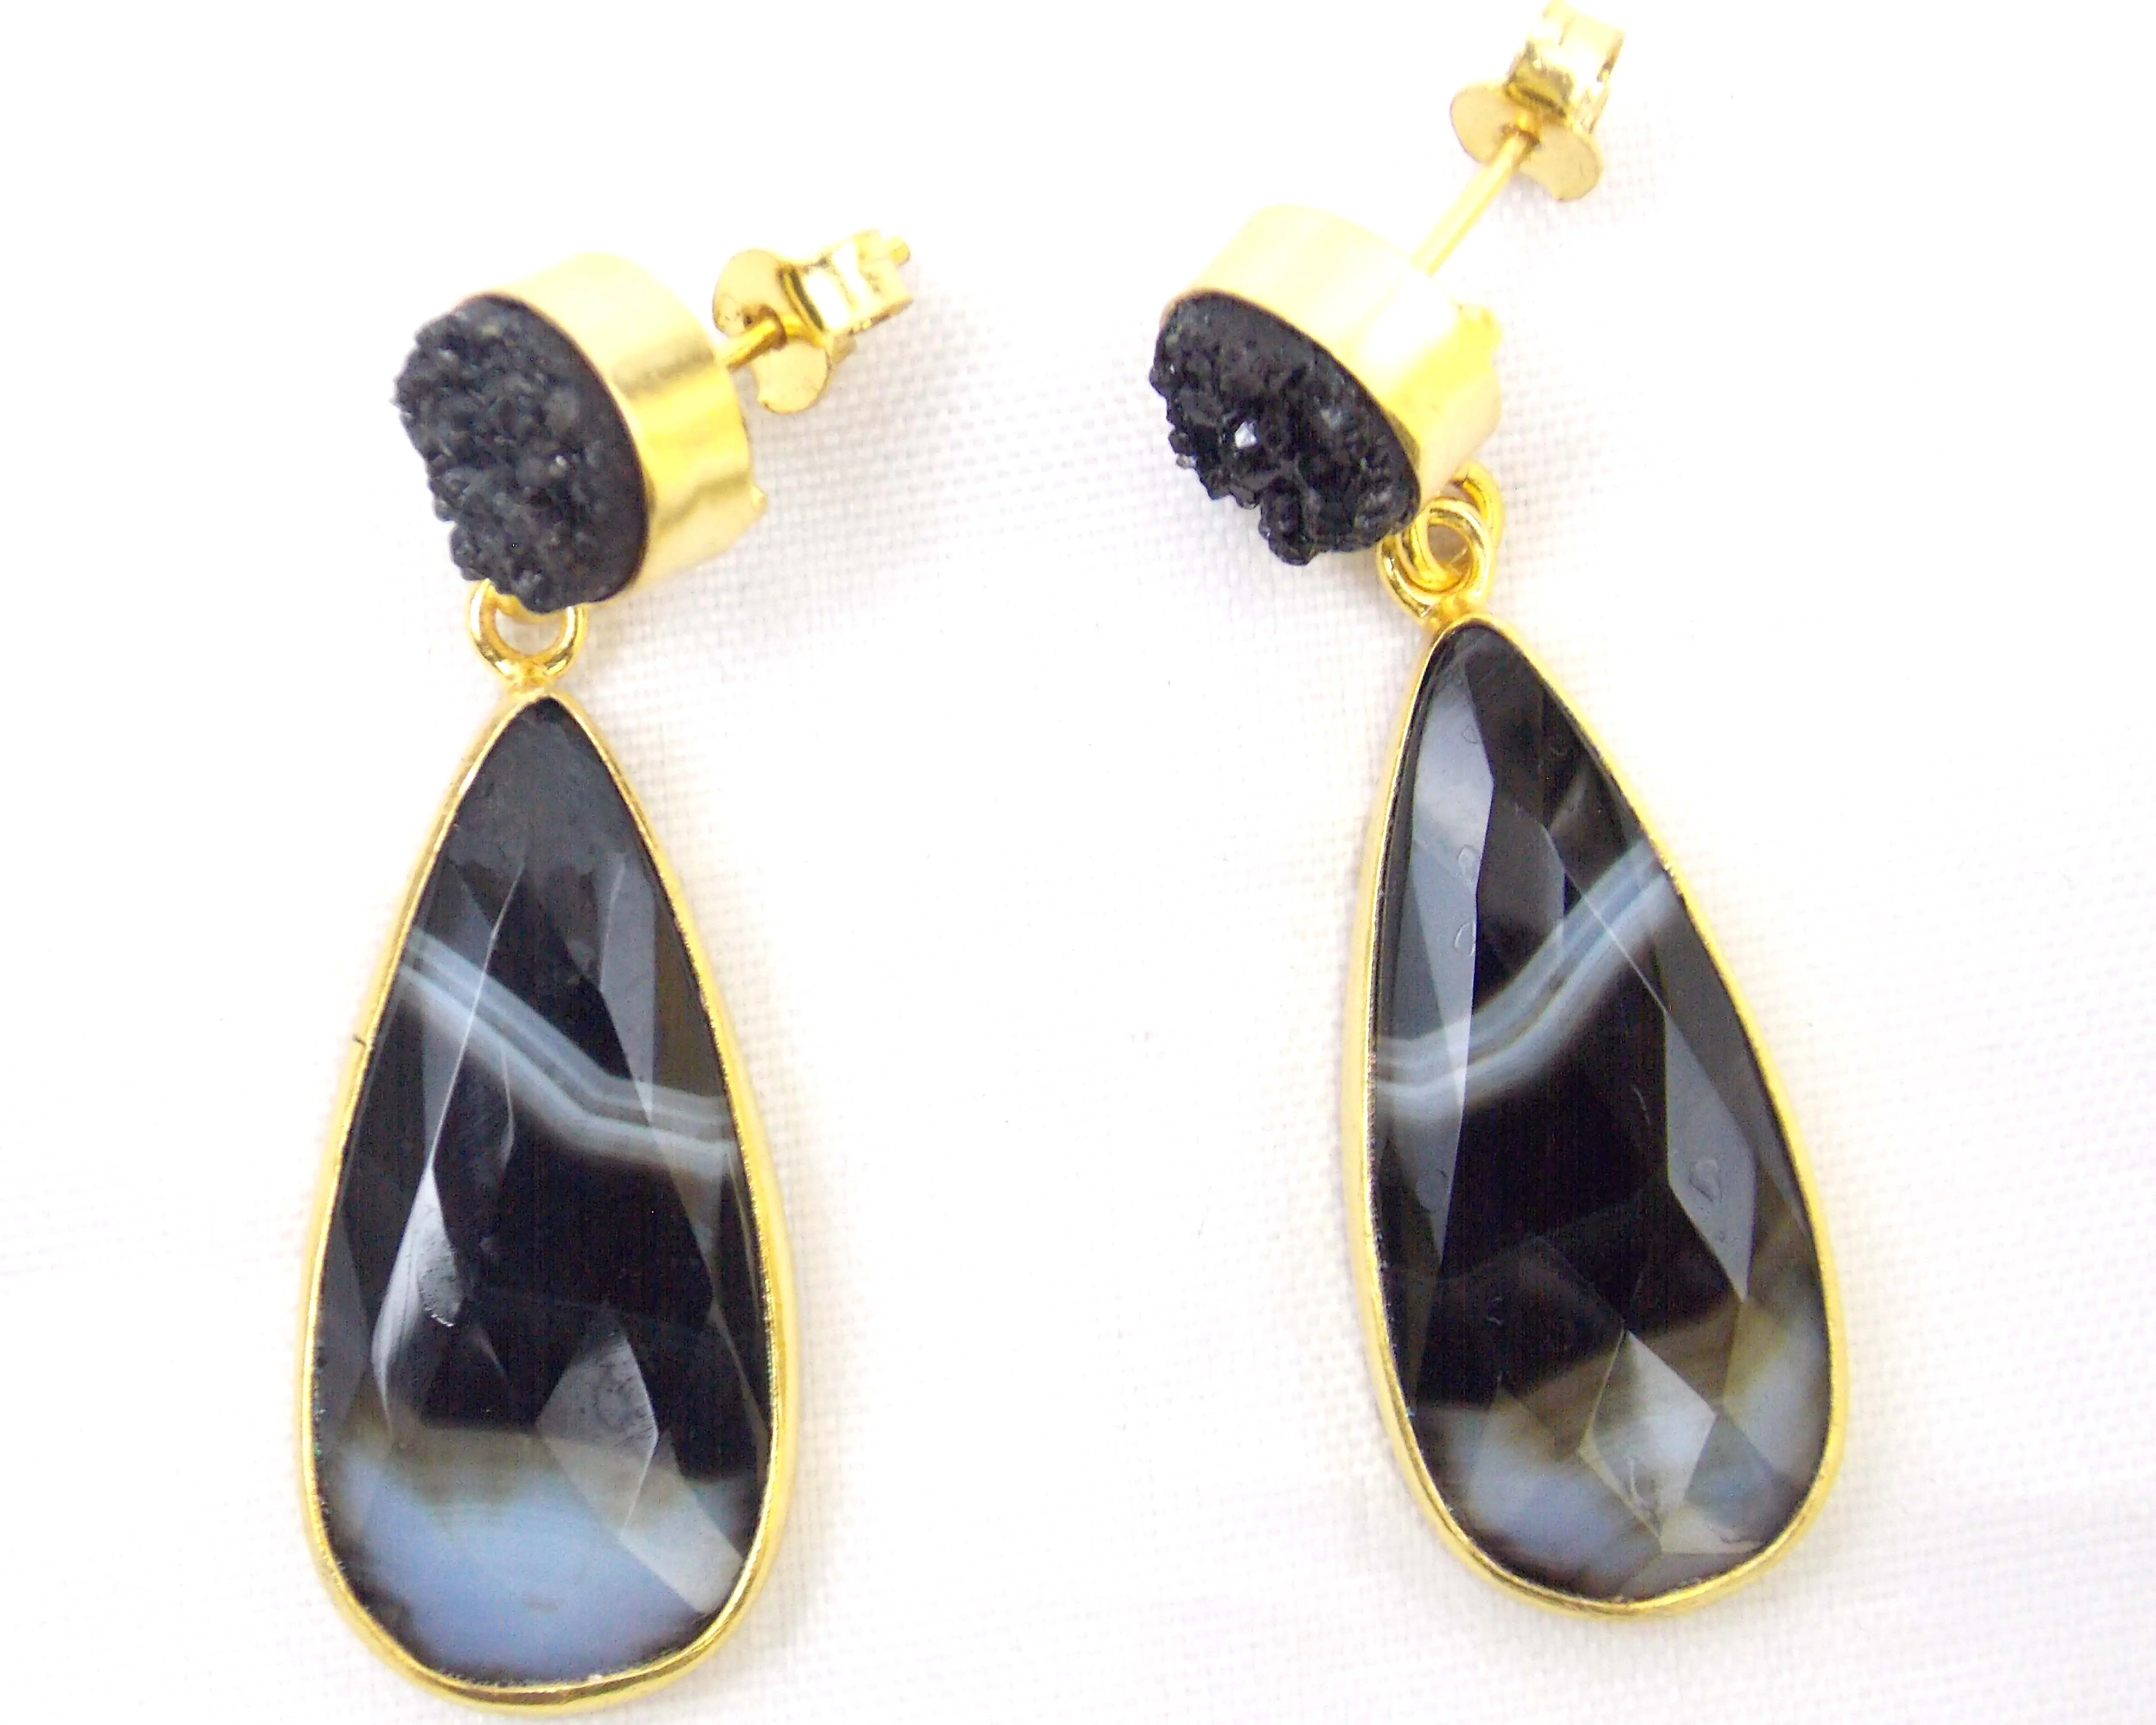 Black Onyx Agate and Black Druzy Gemstone Pear with round shape Fashion stud Earring with gold plated